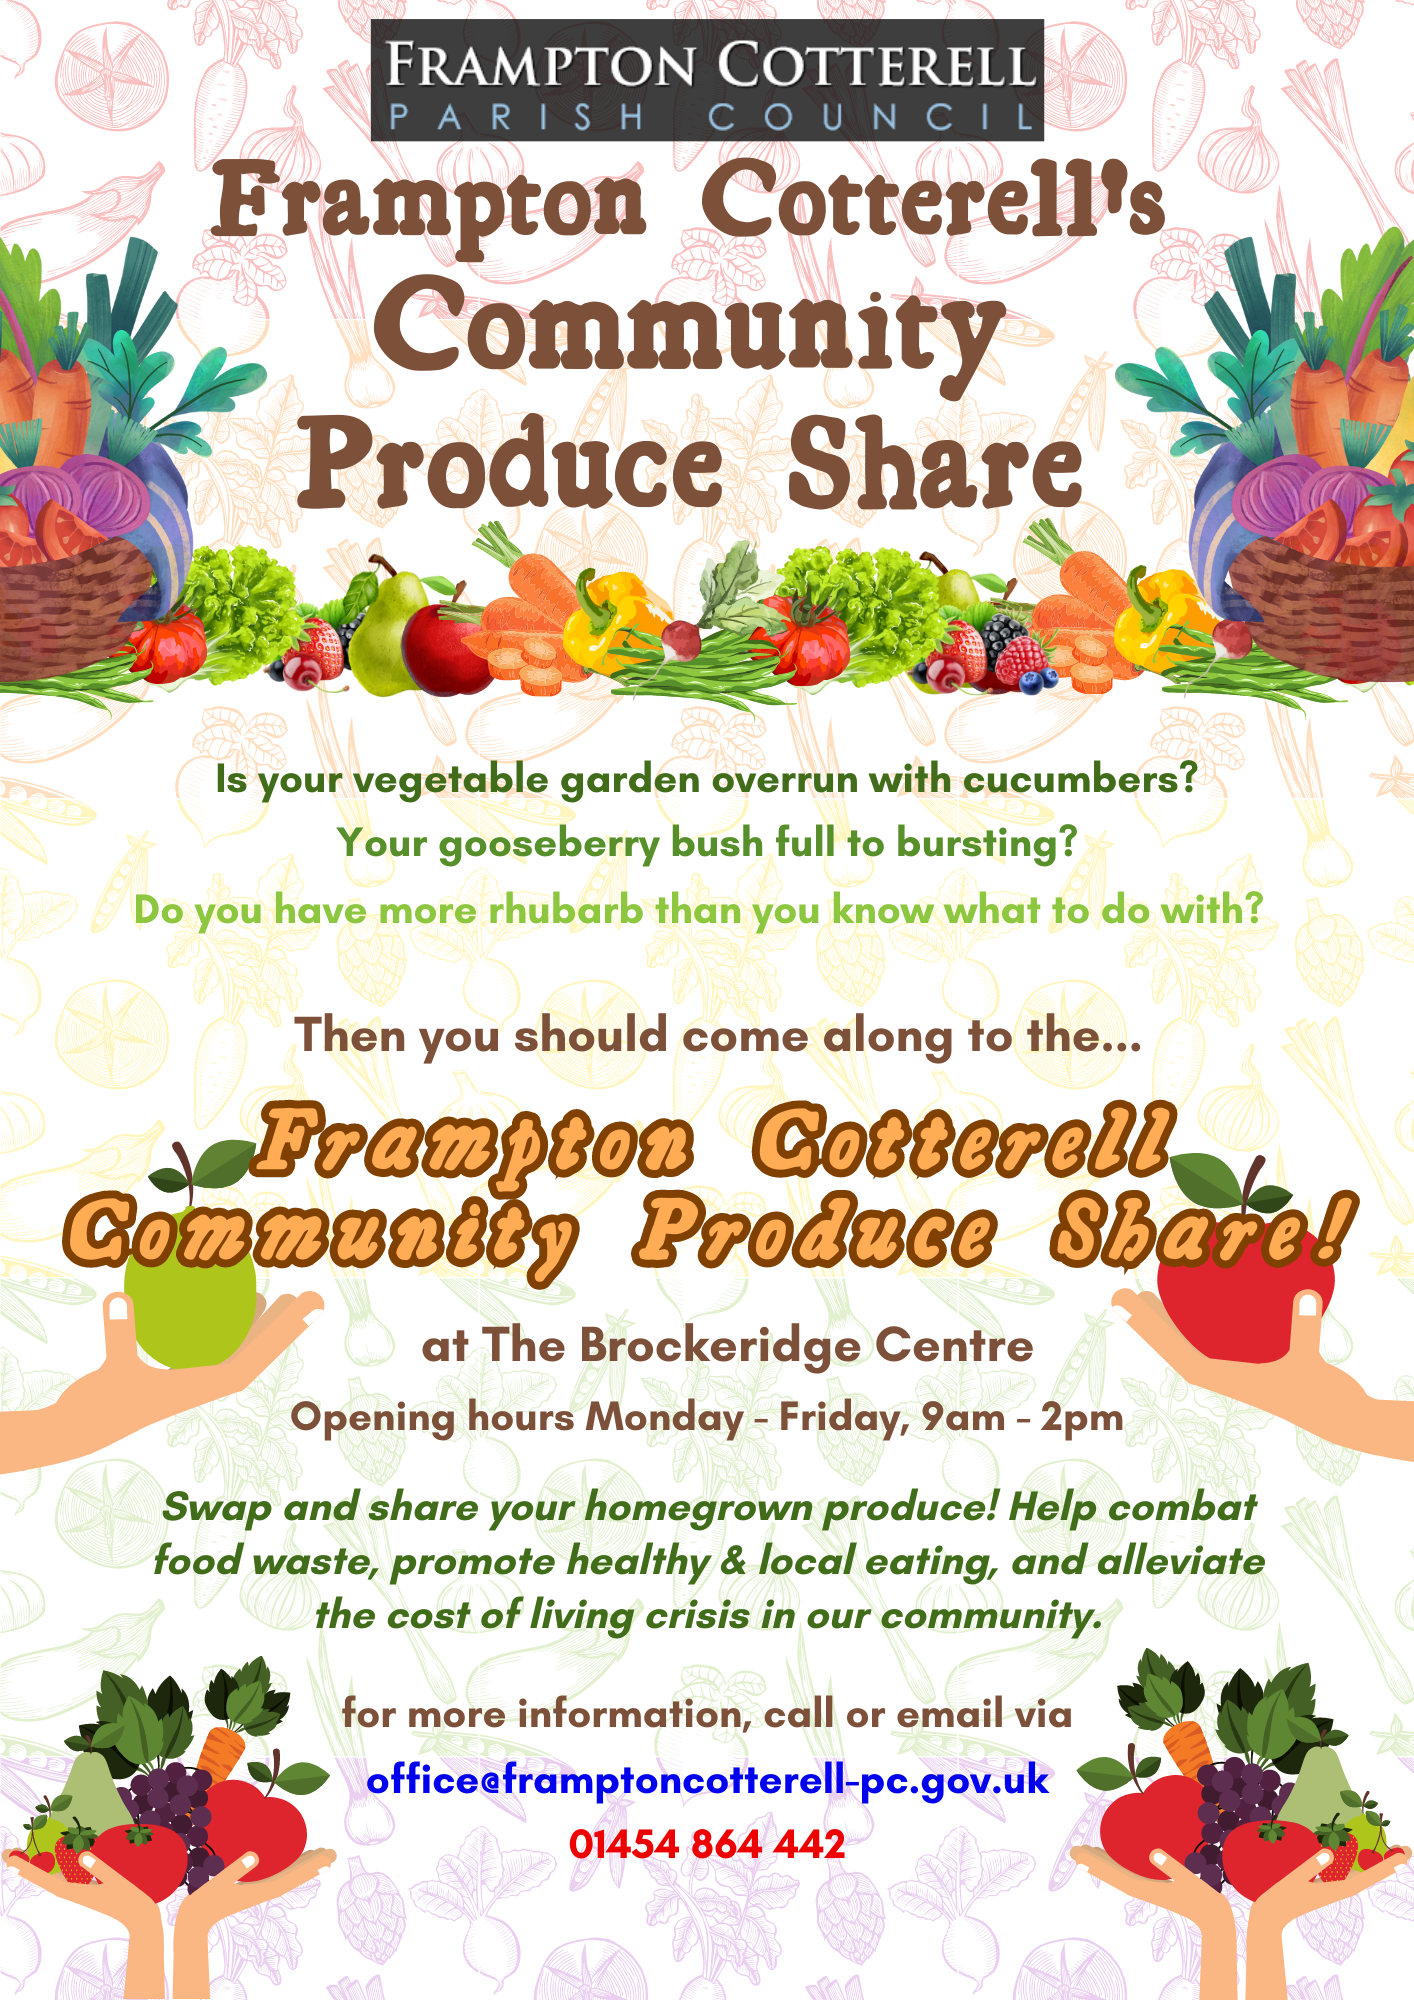 Frampton Cotterell parish Council. Frampton Cotterell's Community Produce Share. Is your vegetable garden overrun with cucumbers? Your gooseberry bush full to bursting? Do you have more rhubarb than you know what to do with? Then you should come along to the... Frampton Cotterell Community Produce Share! at The Brockeridge Centre Opening hours Monday - Friday, 9am - 2pm. Swap and share your homegrown produce! Help combat food waste, promote healthy & local eating, and alleviate the cost of living crisis in our community. for more information, call or email via office@framptoncotterell-pc.gov.uk / 01454 864 442